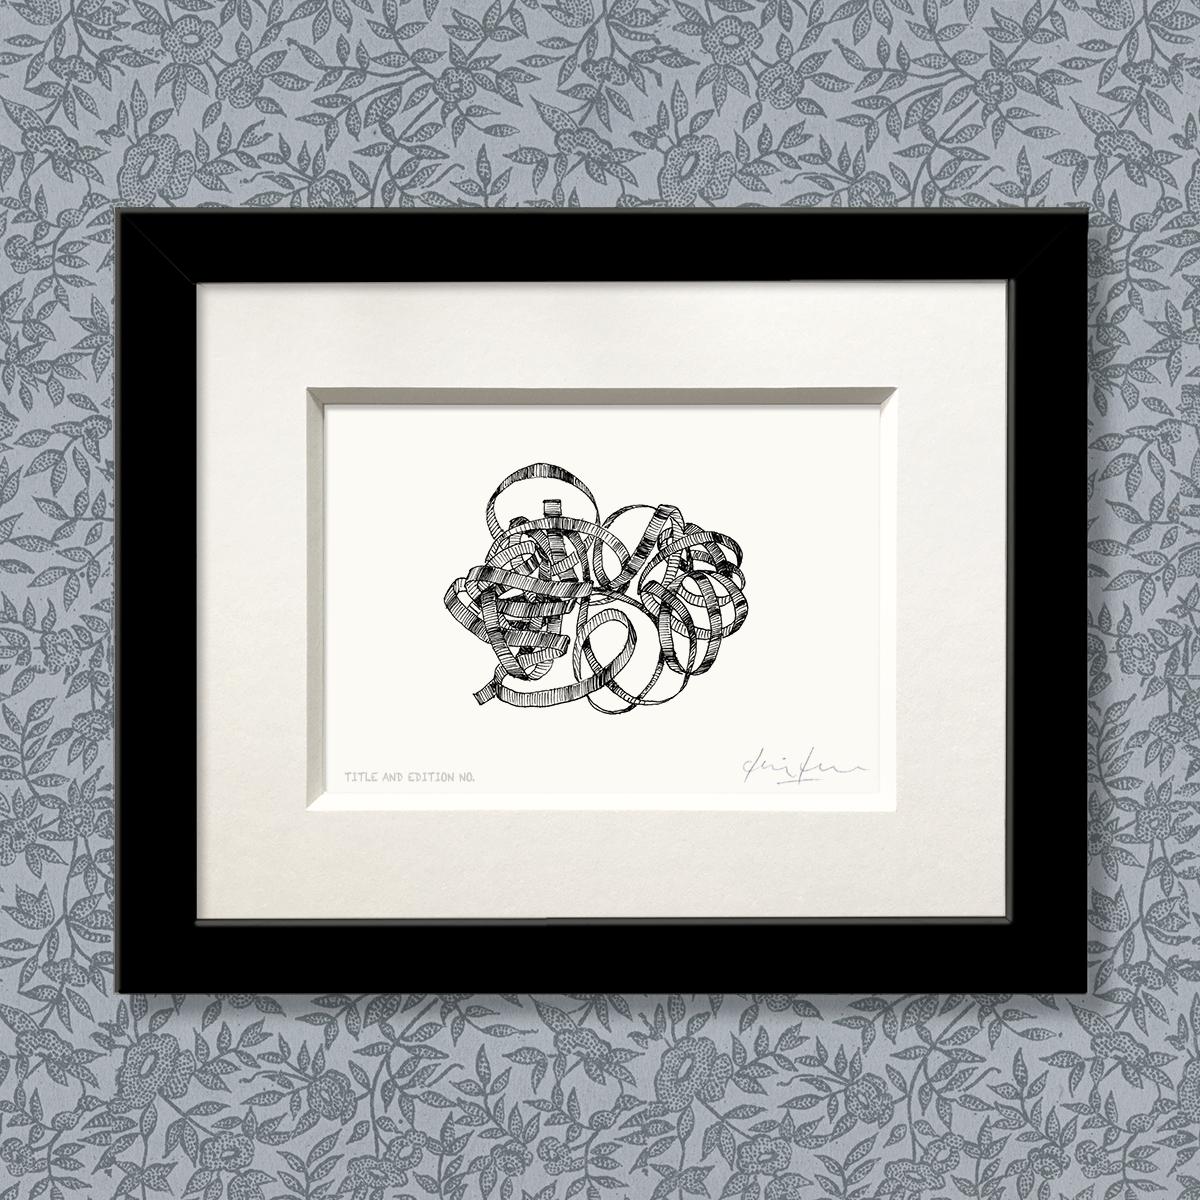 Limited edition print from pen and ink drawing of a ribbon in a black frame